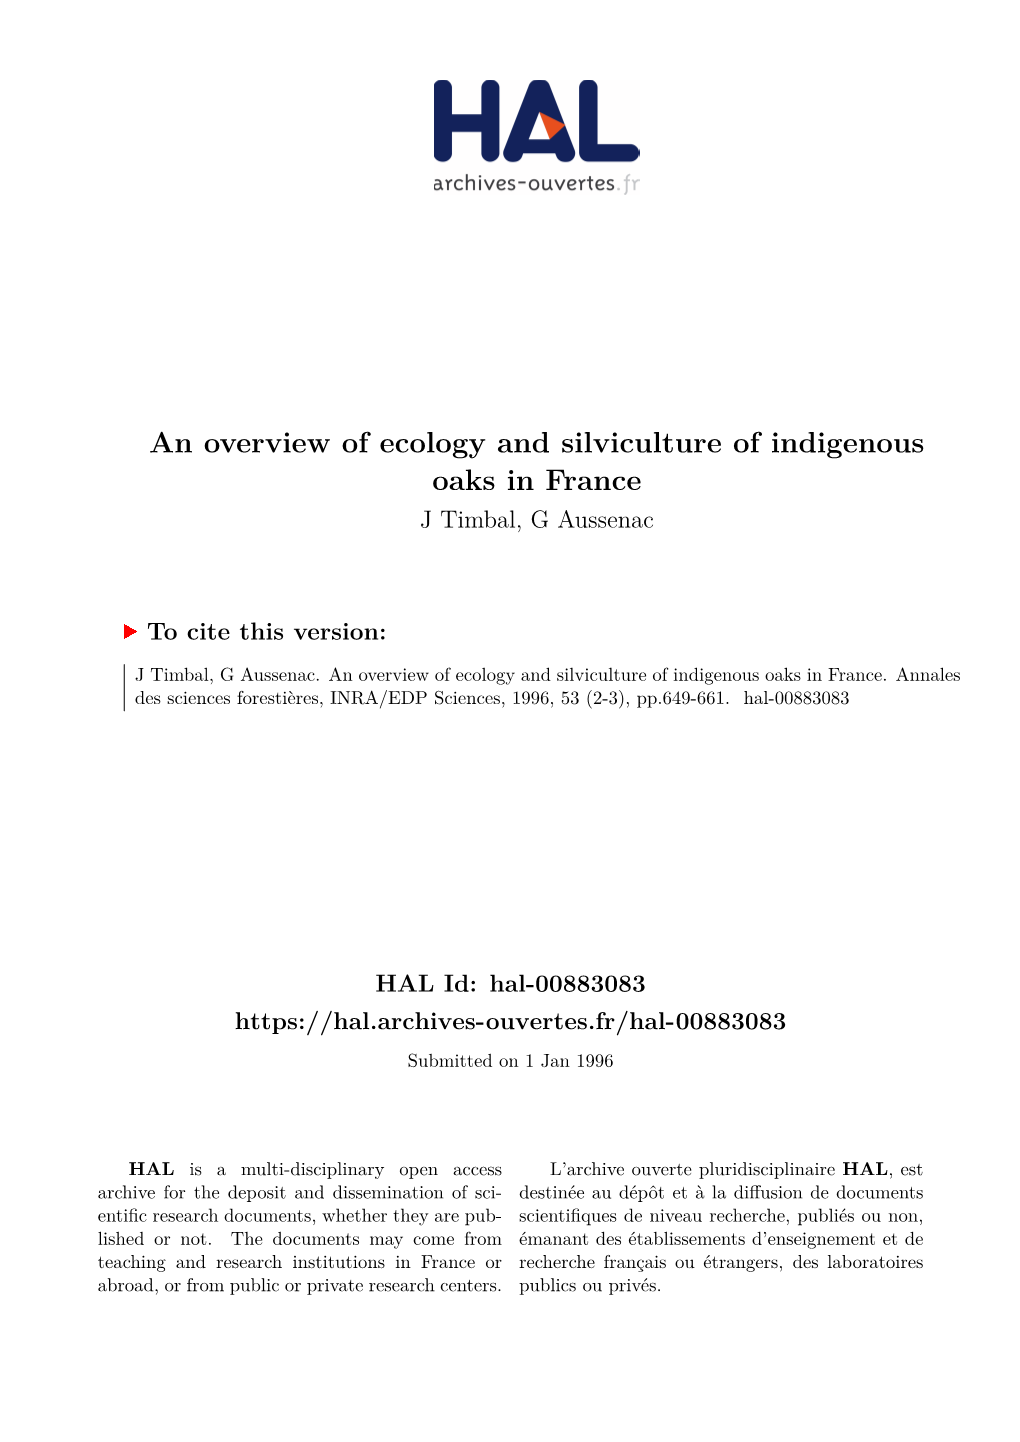 An Overview of Ecology and Silviculture of Indigenous Oaks in France J Timbal, G Aussenac